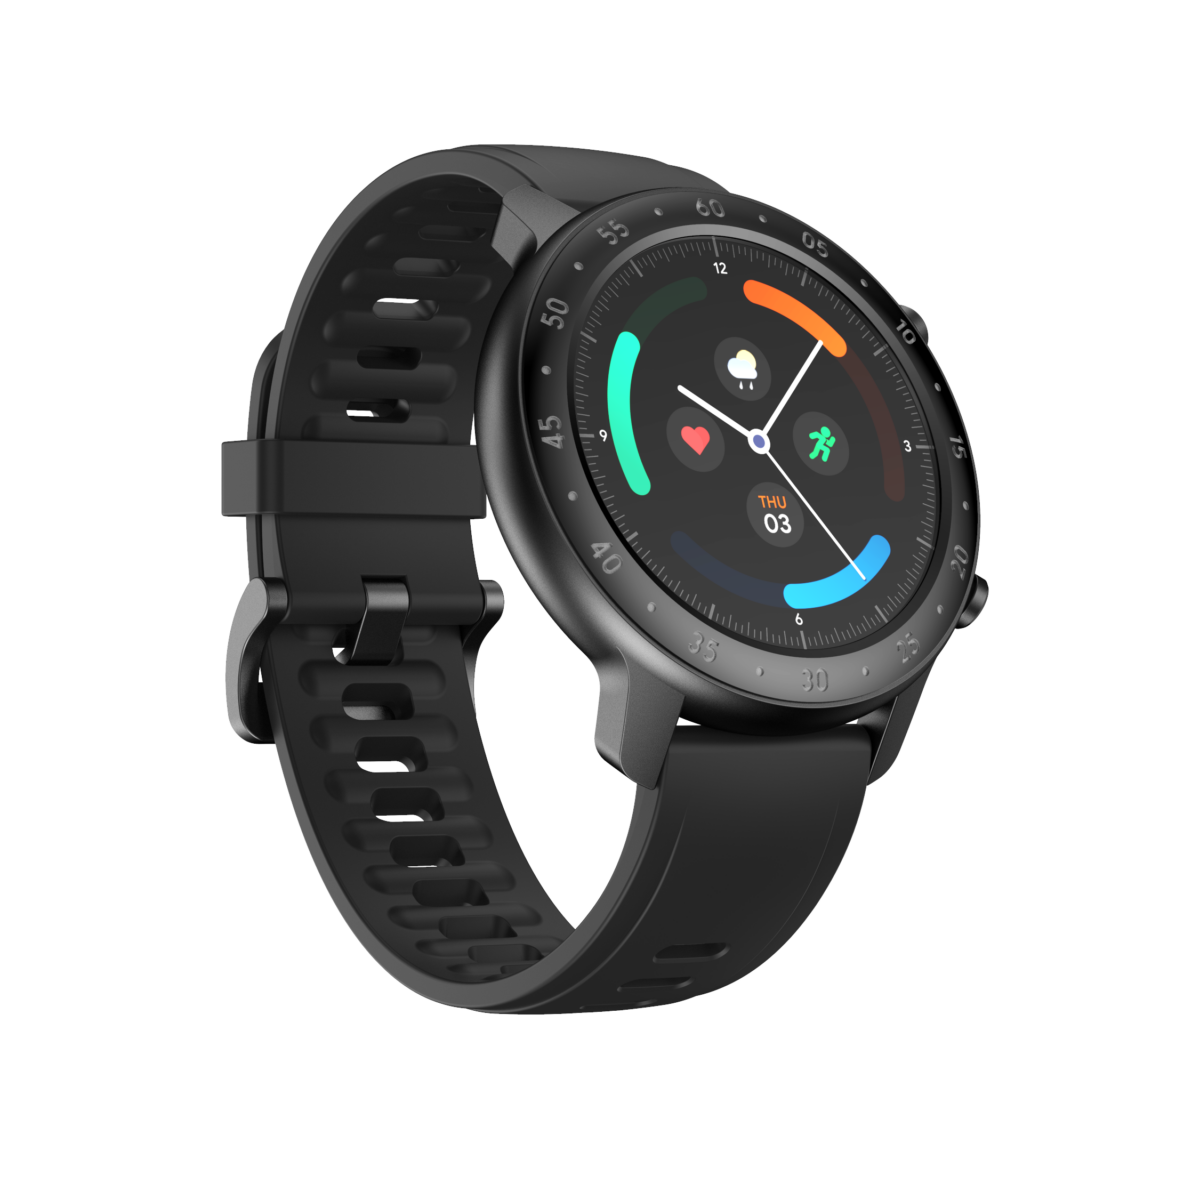 Mobvoi's new TicWatch GTX is an affordable, entry-level smartwatch for those of you who want basic fitness tracking and health monitoring.